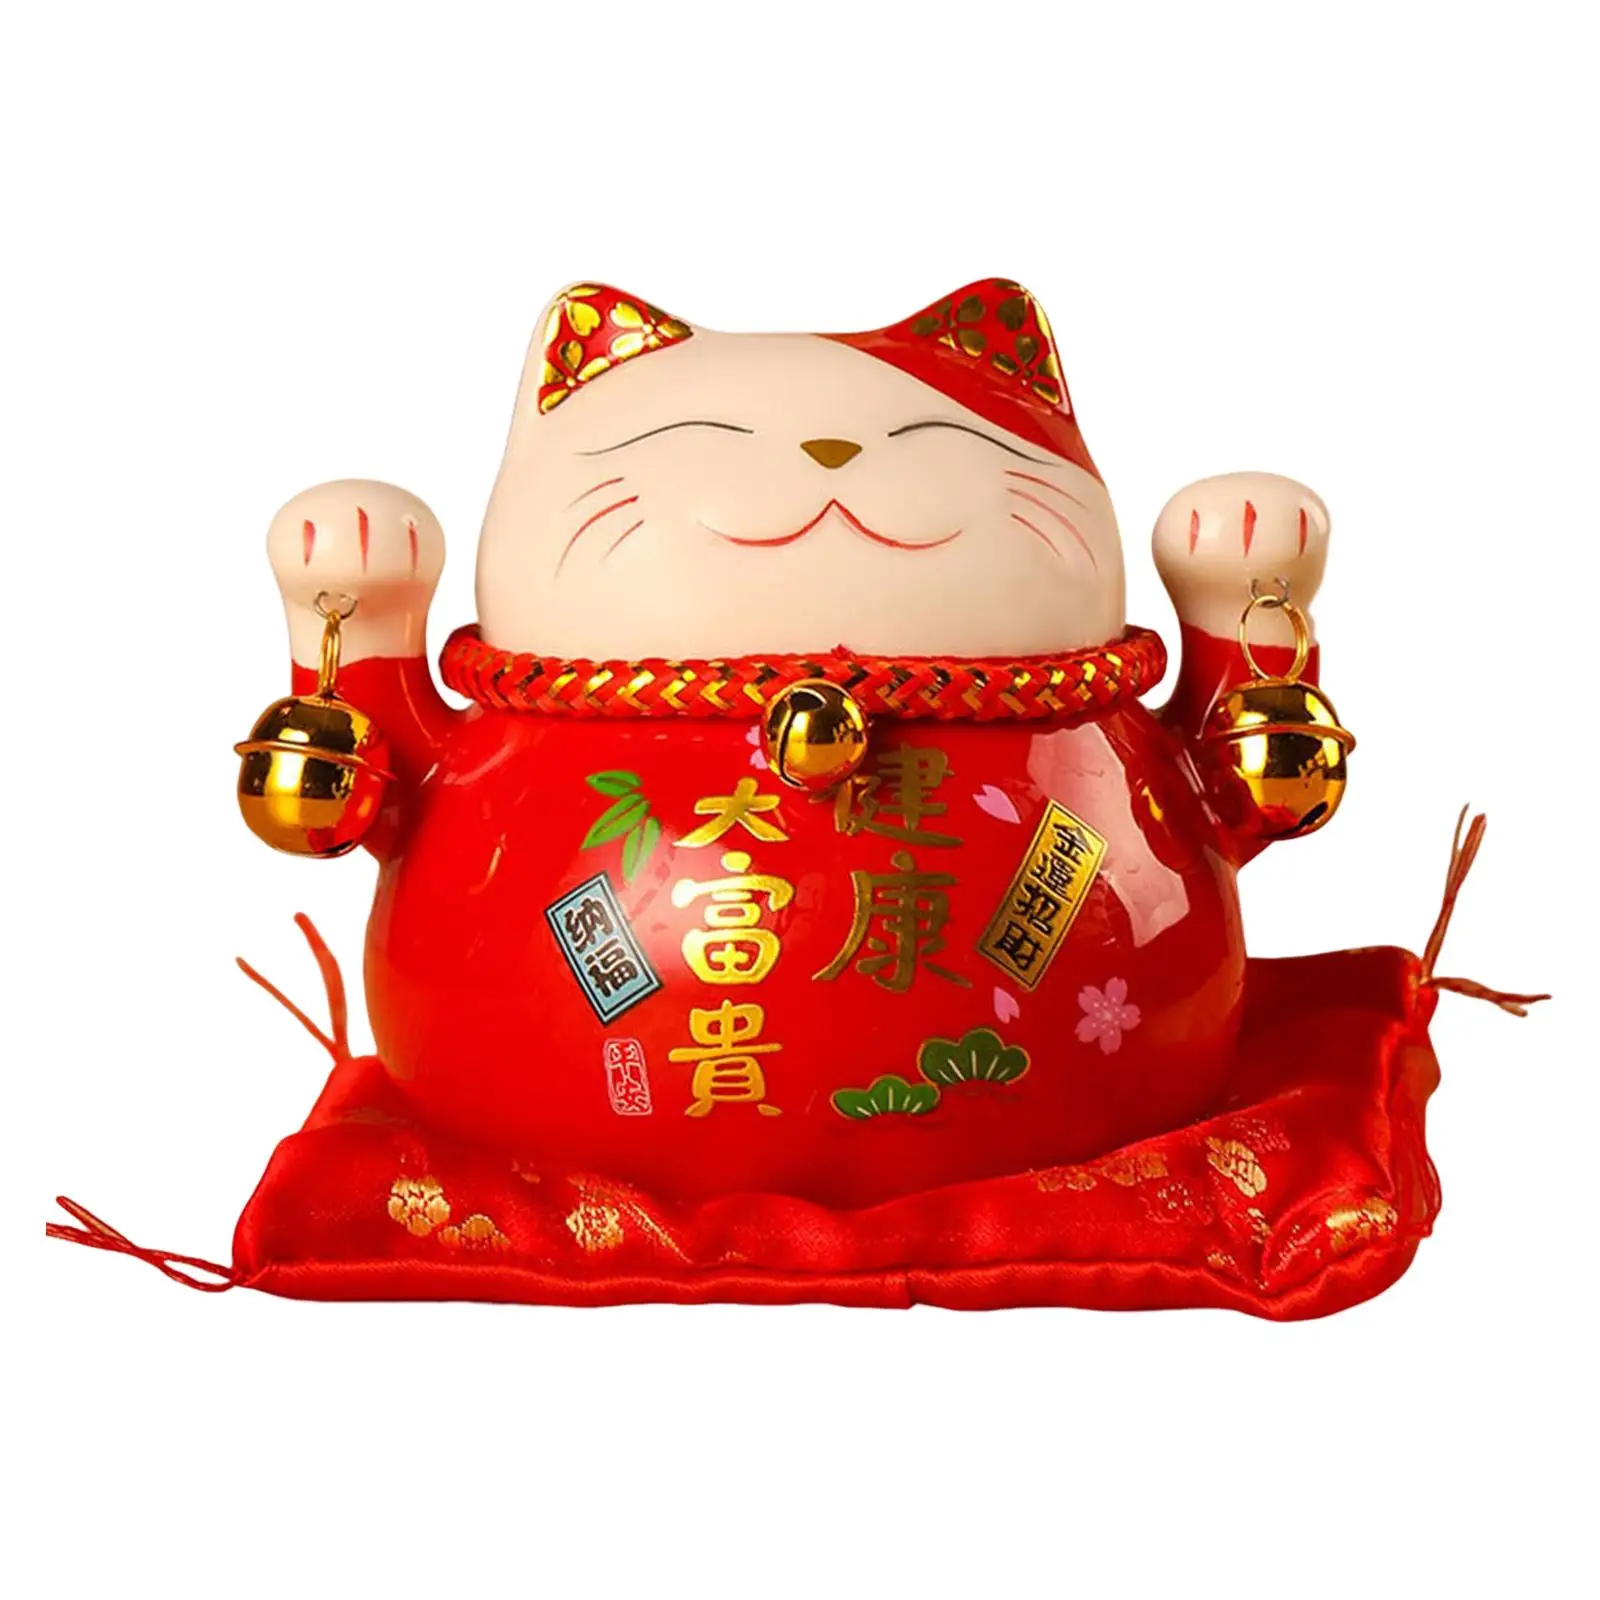 Ceramic Lucky Cat Money Bank Figurines with Bell Decorative Crafts Storage Home Decor Chinese Style for Tabletop Business Gift